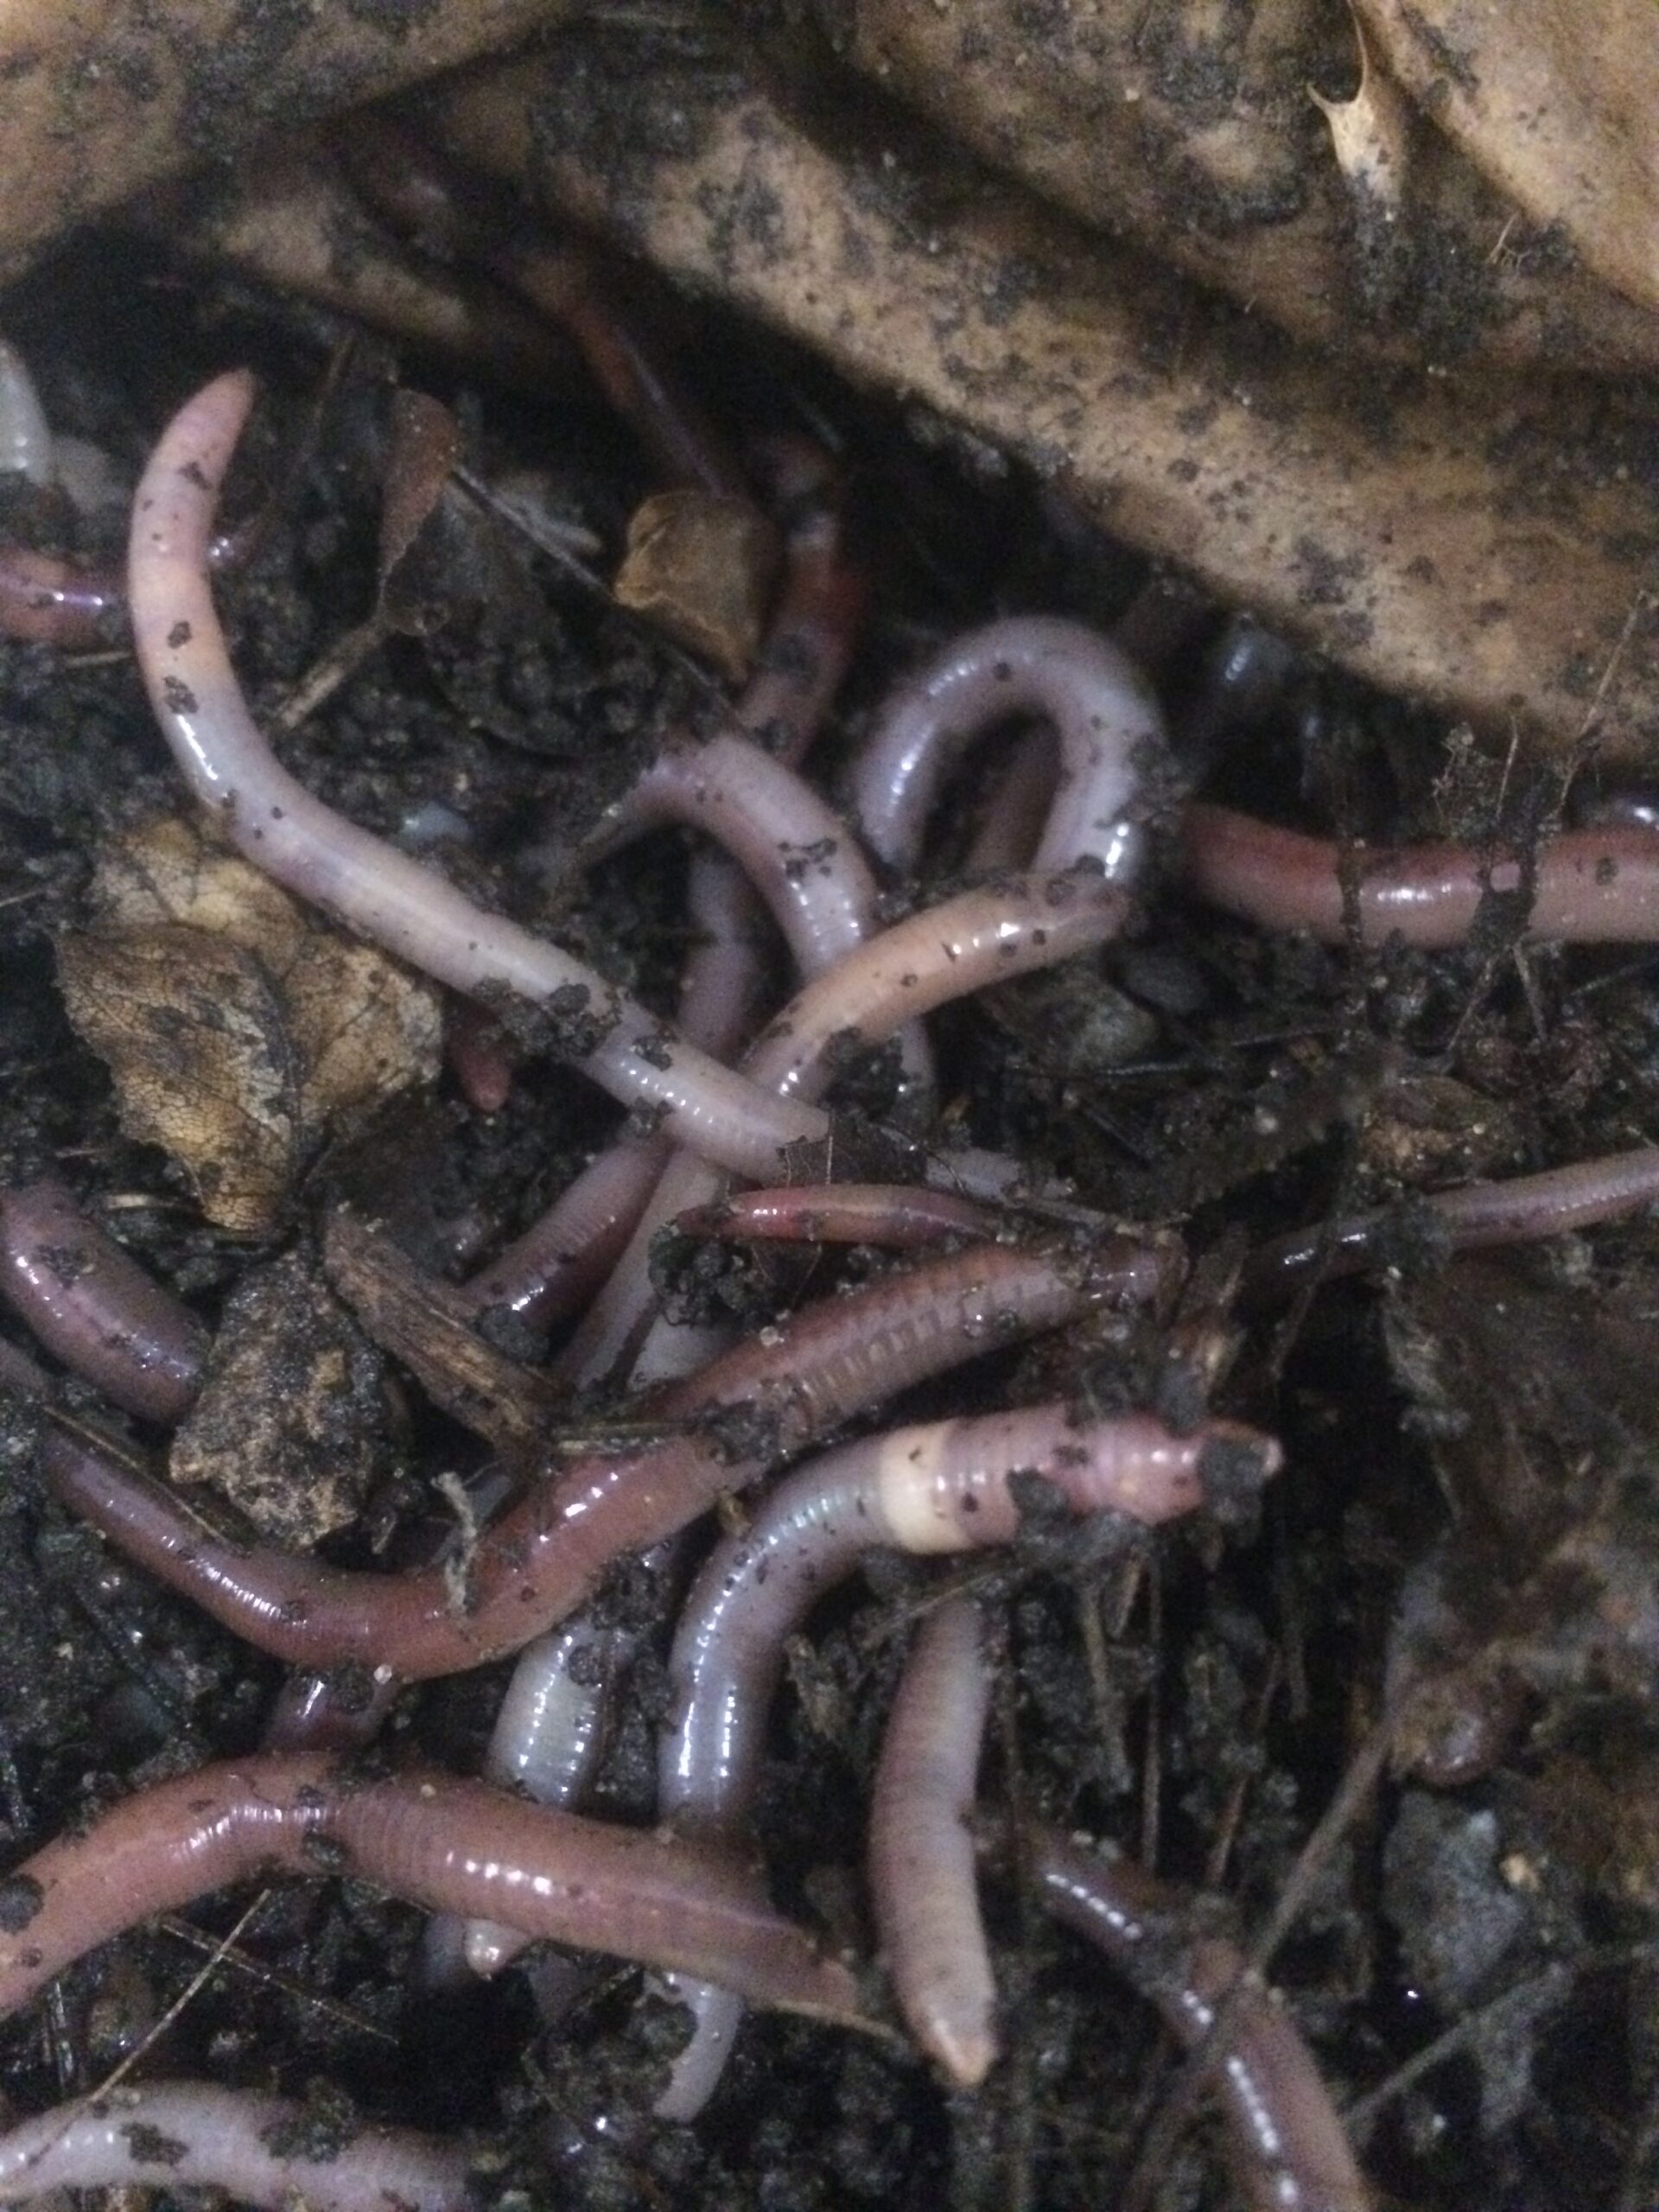 Wisconsin DNR Calls For Public To Help Track Invasive Worm Species